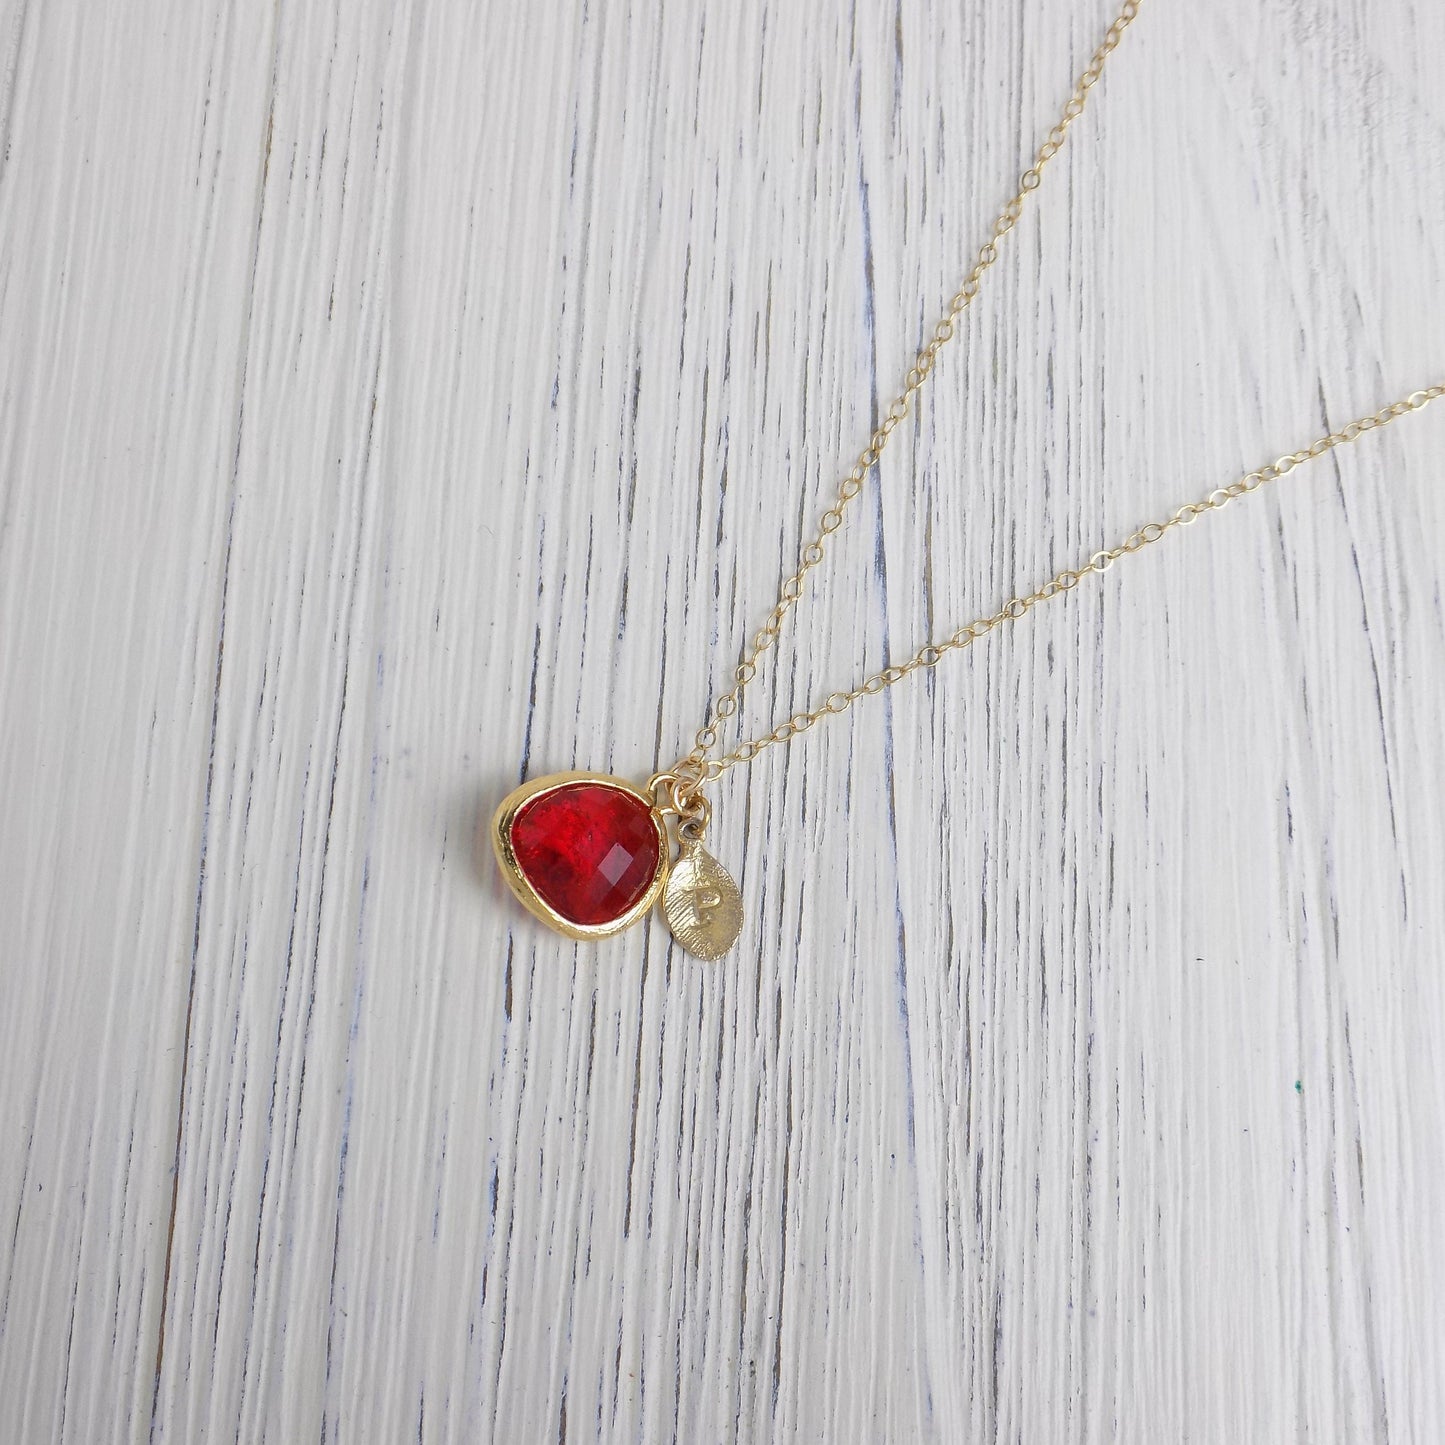 Personalized Red Crystal Quartz Necklace With 14K Gold Filled Chain, Custom Christmas Gift For Mom, Hand Stamped Initial Charm, M6-702